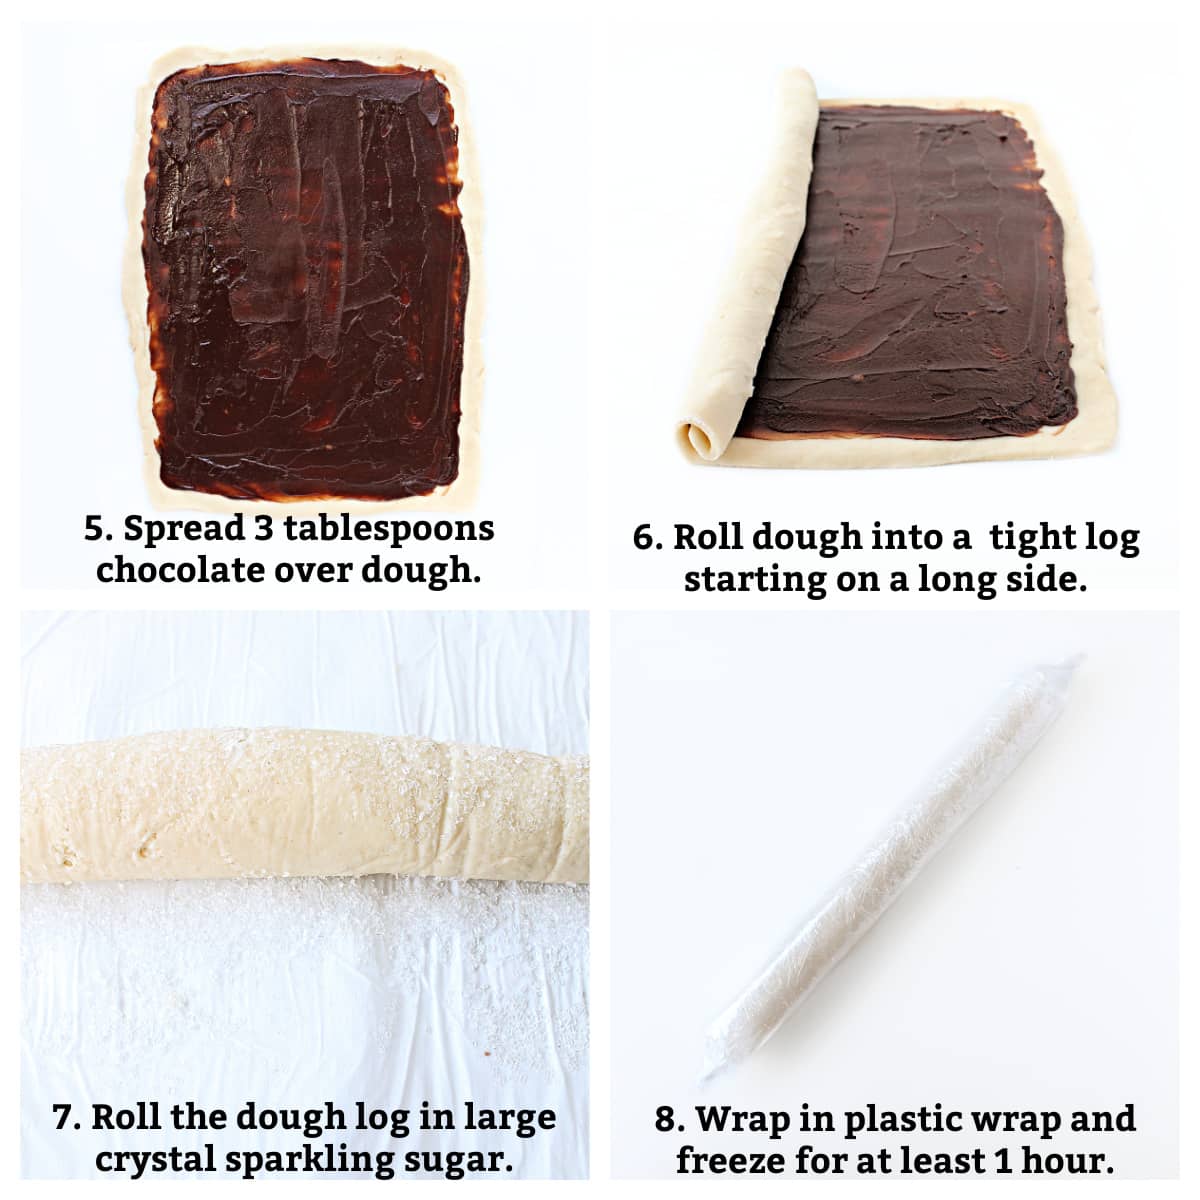 Instructions labeled; spread chocolate filling over dough, roll into log, coat with sugar, wrap and freeze.